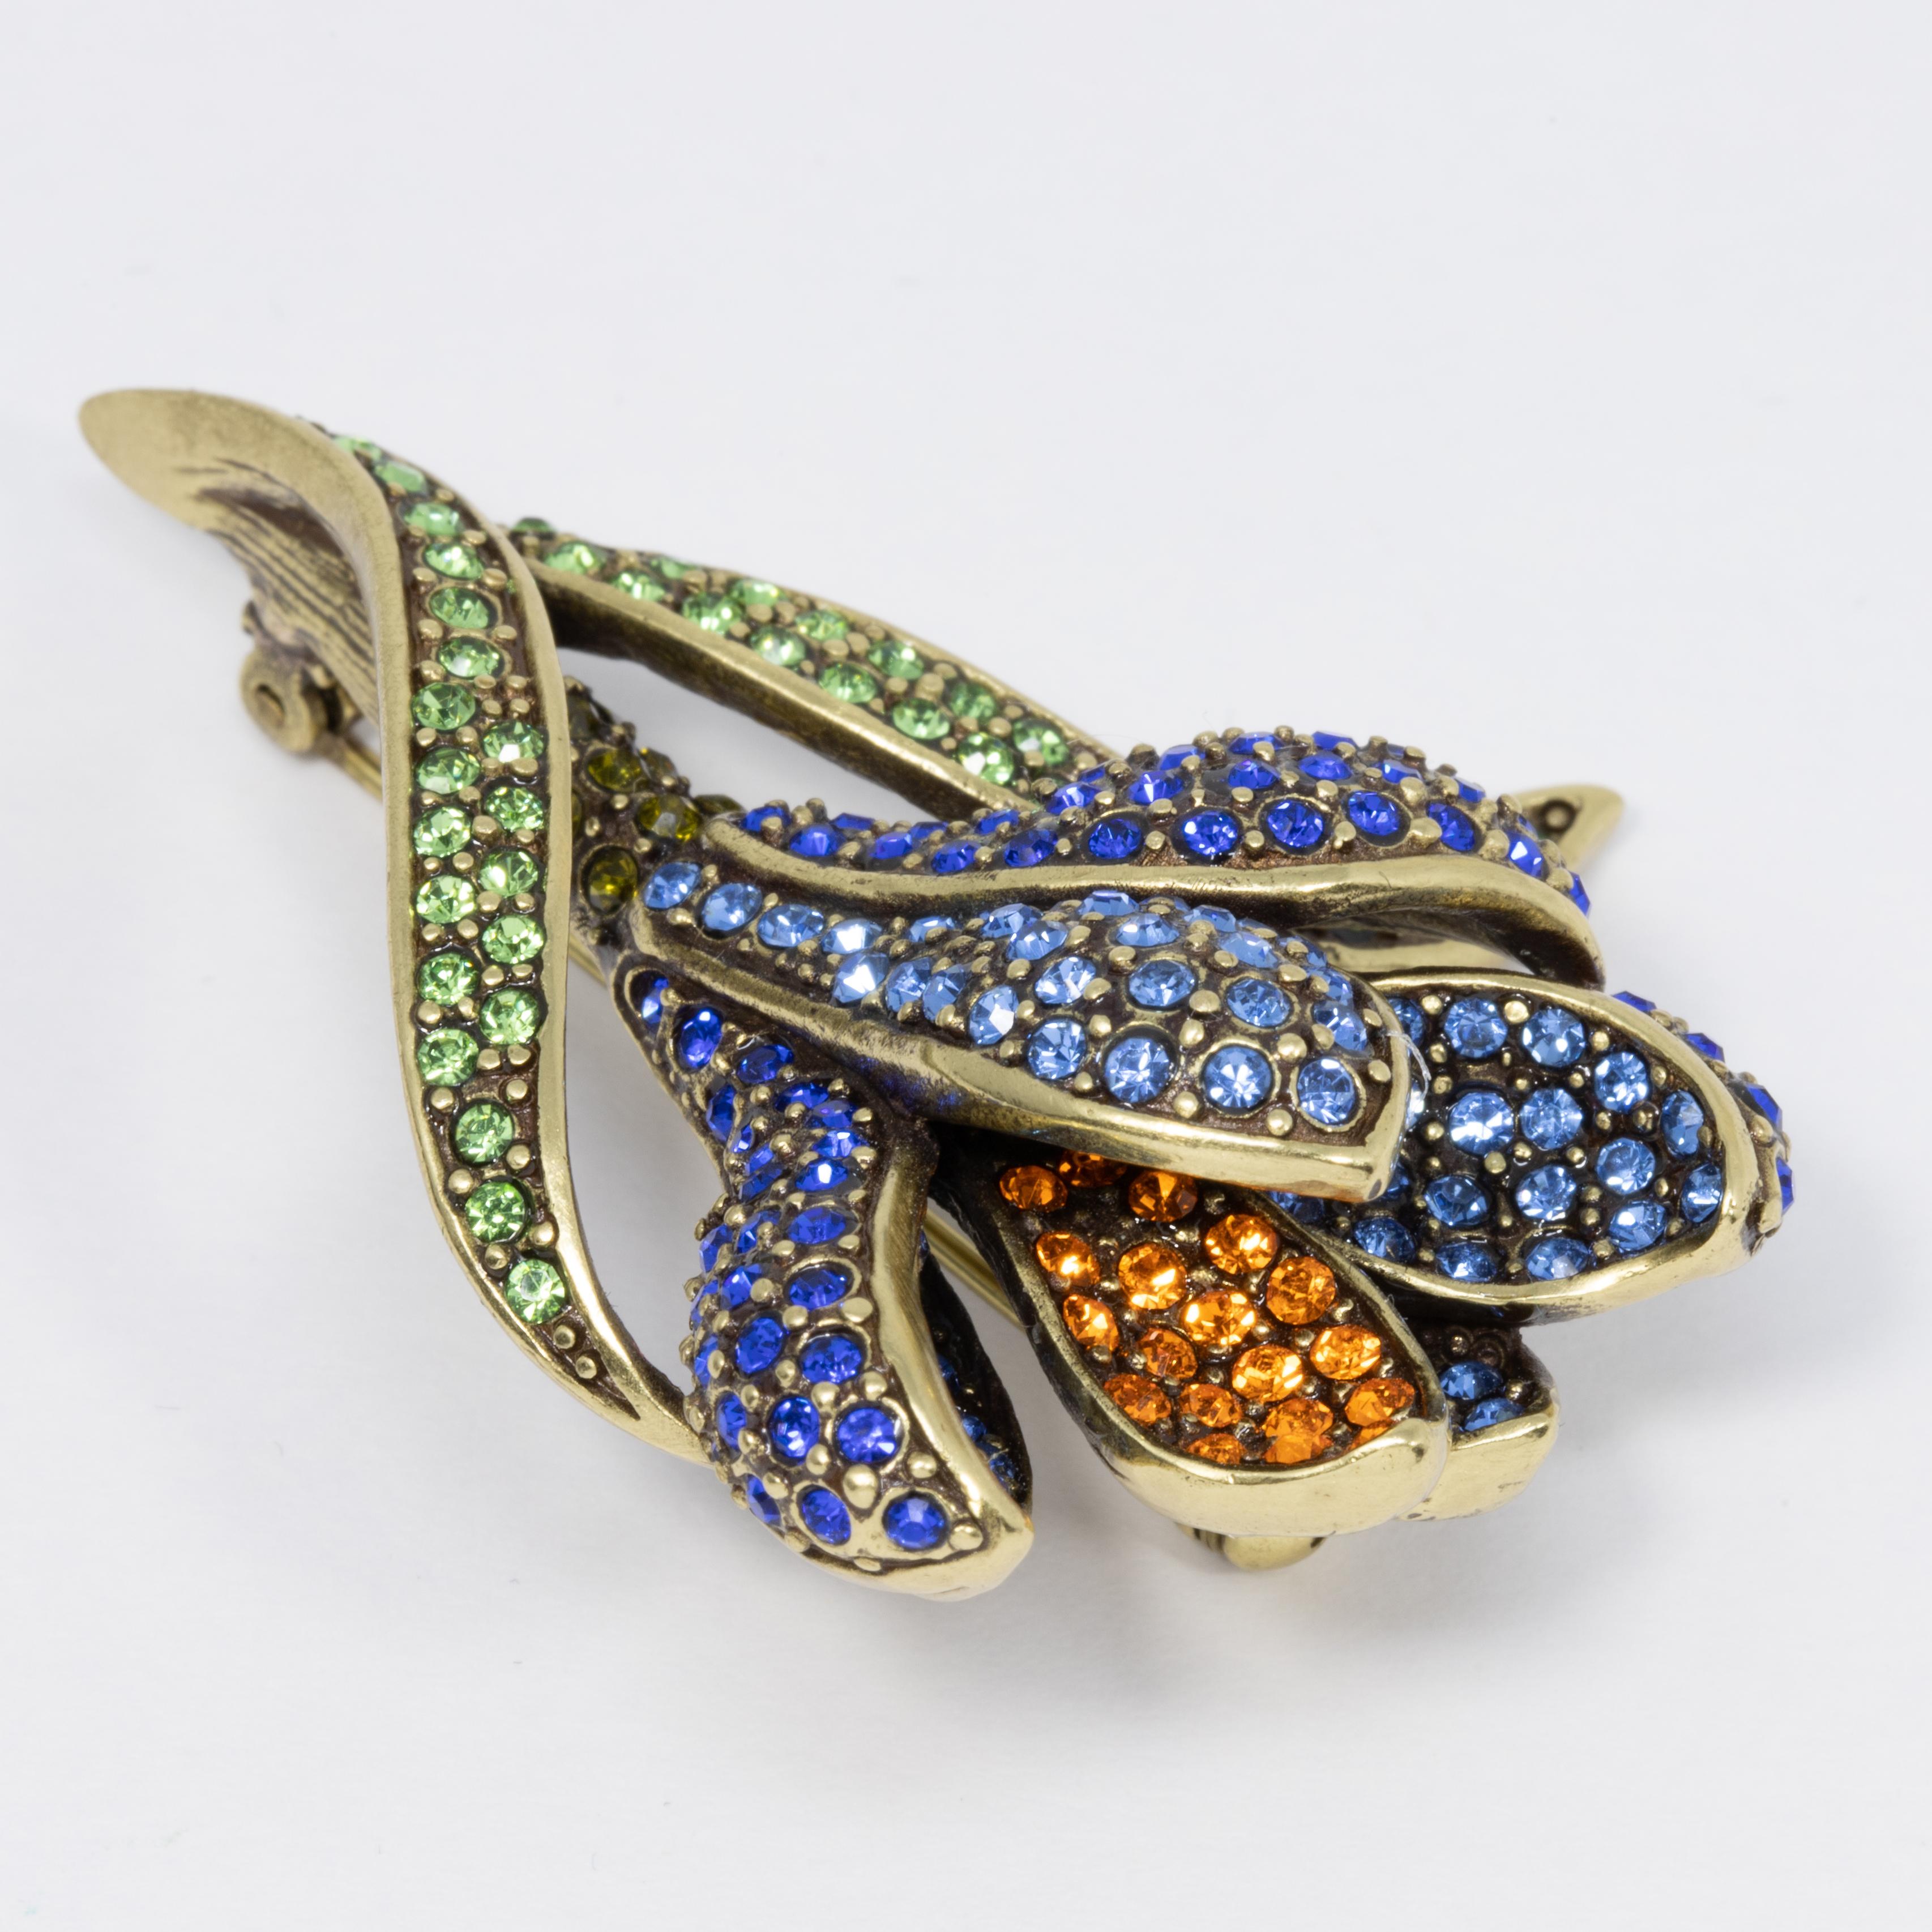 Add an elegant floral touch to your style with this flower brooch from Heidi Daus. Accented with pave aquamarine, cobalt, peridot, and tangerine crystals, this gorgeous flower pin sparkles like no other!

Limited-time, retired